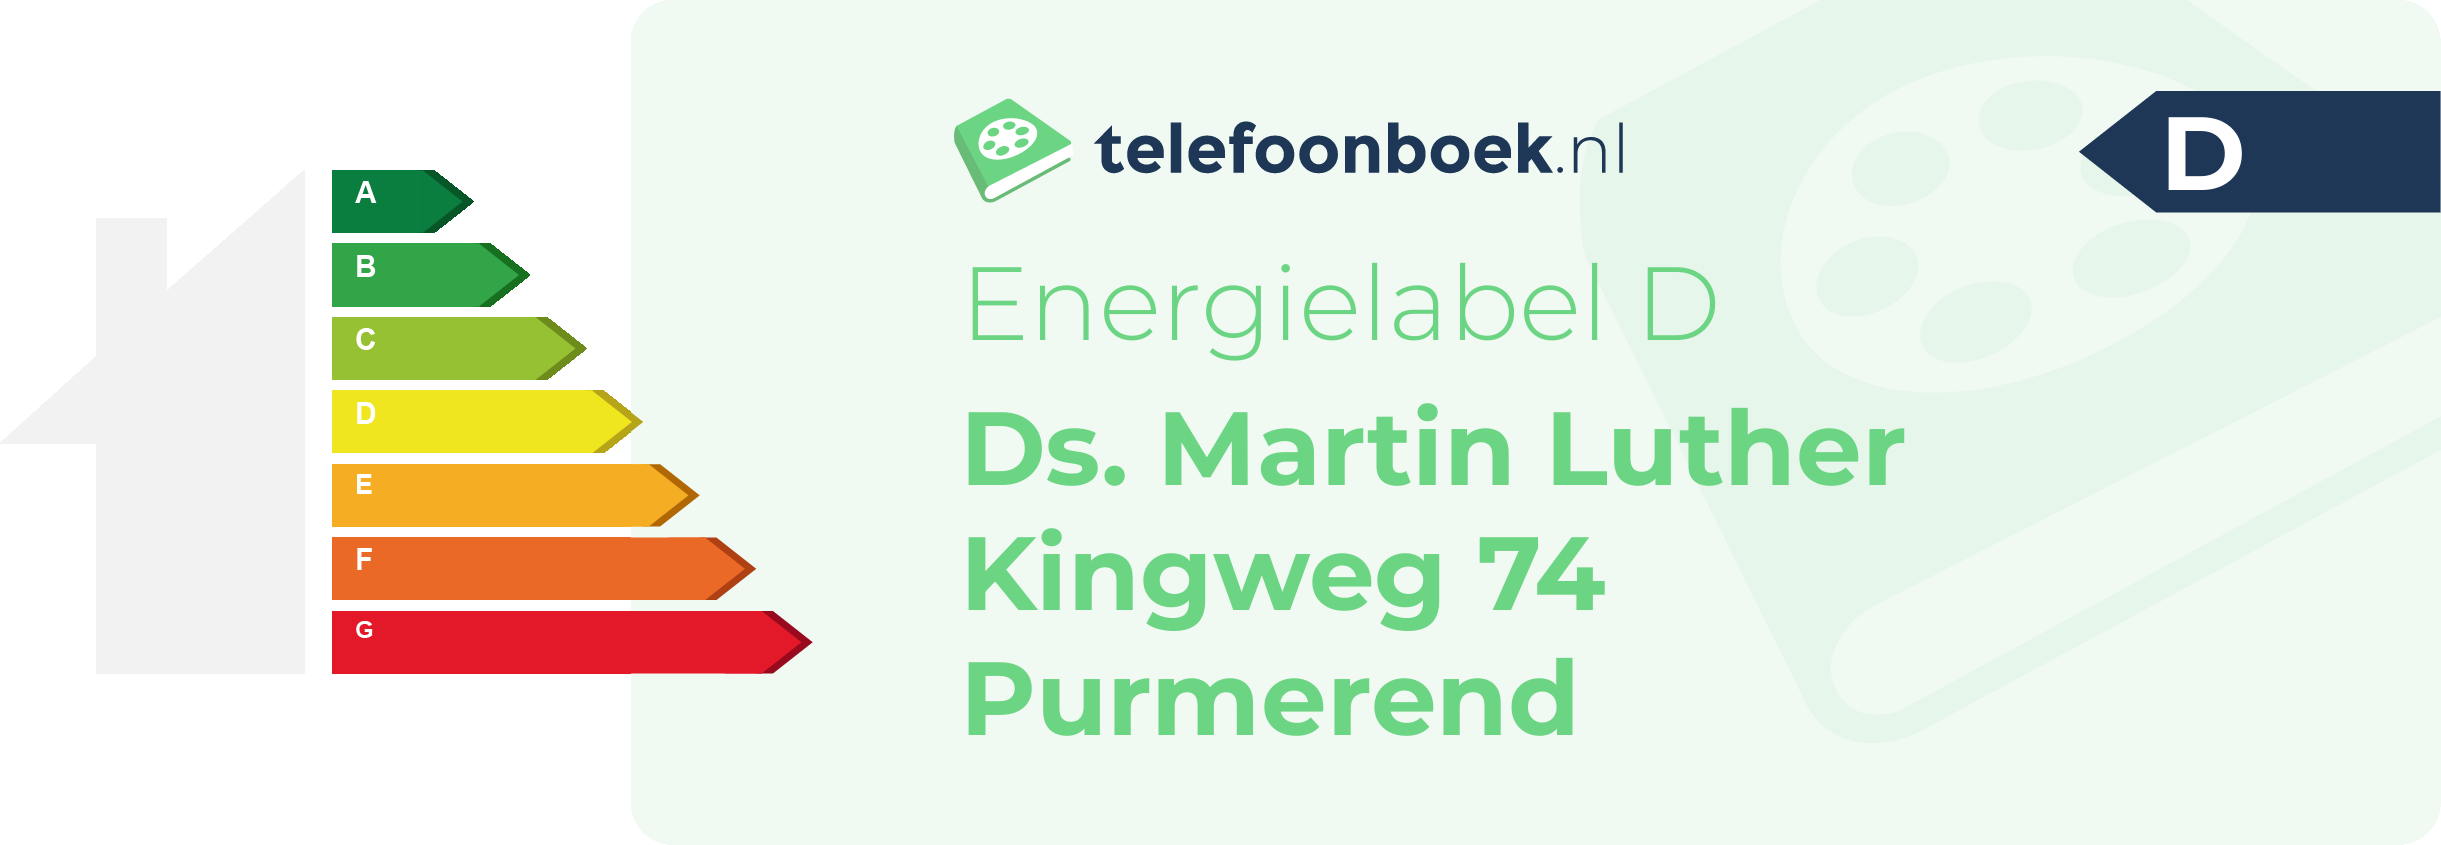 Energielabel Ds. Martin Luther Kingweg 74 Purmerend